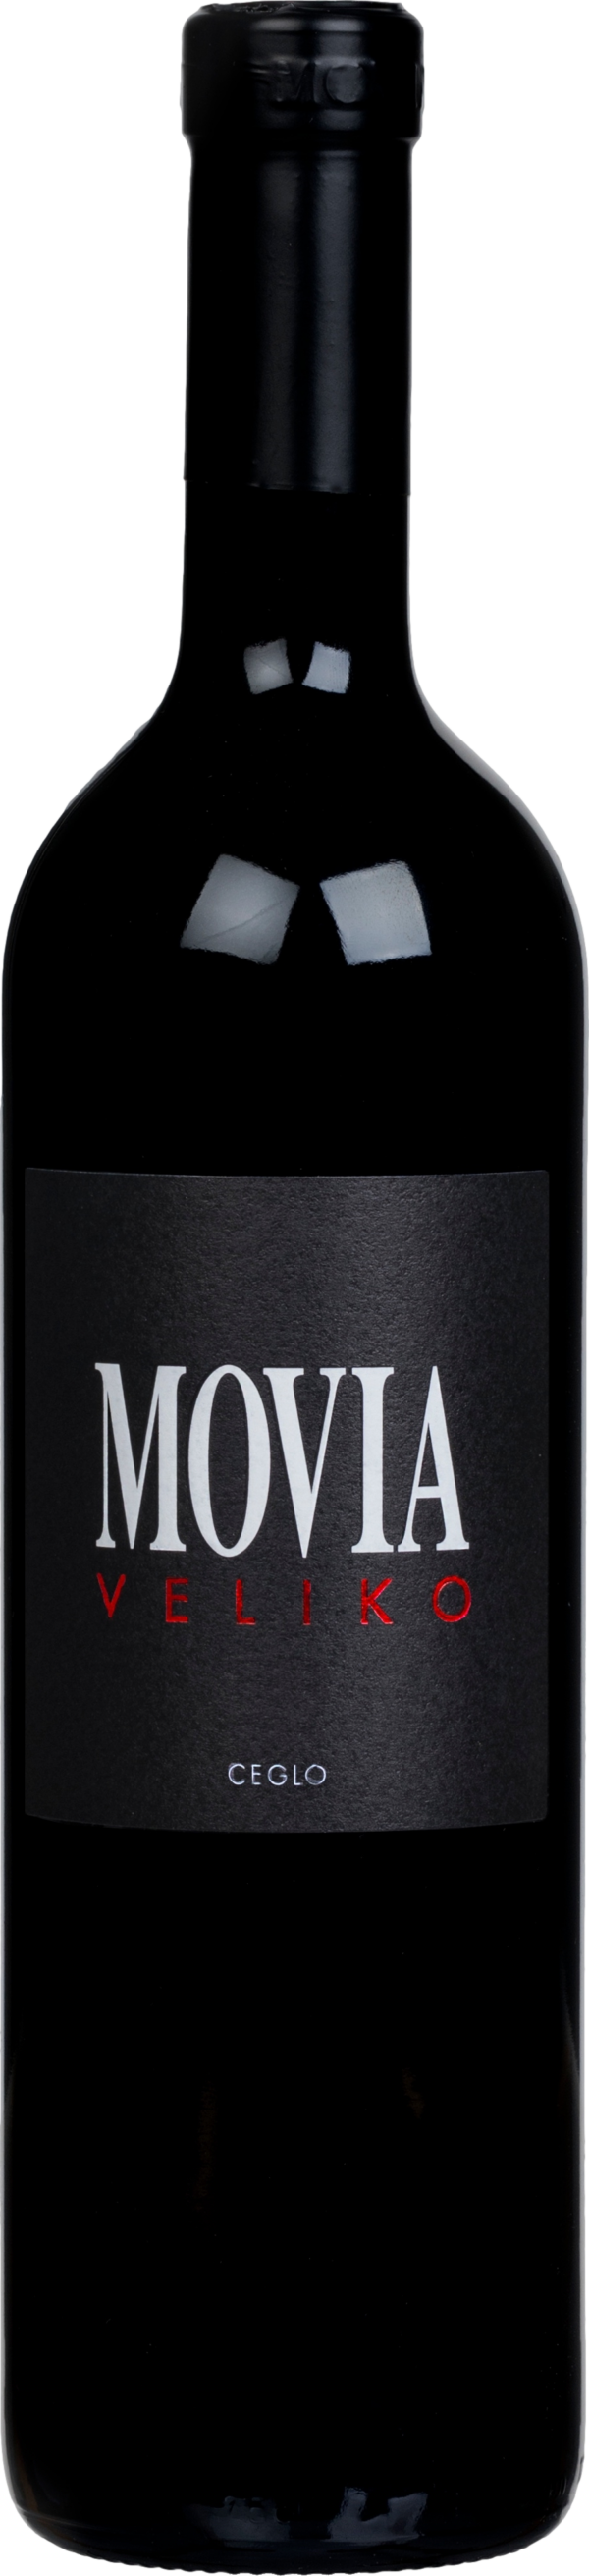 Product image of Movia Veliko Rdece 2016 from 8wines